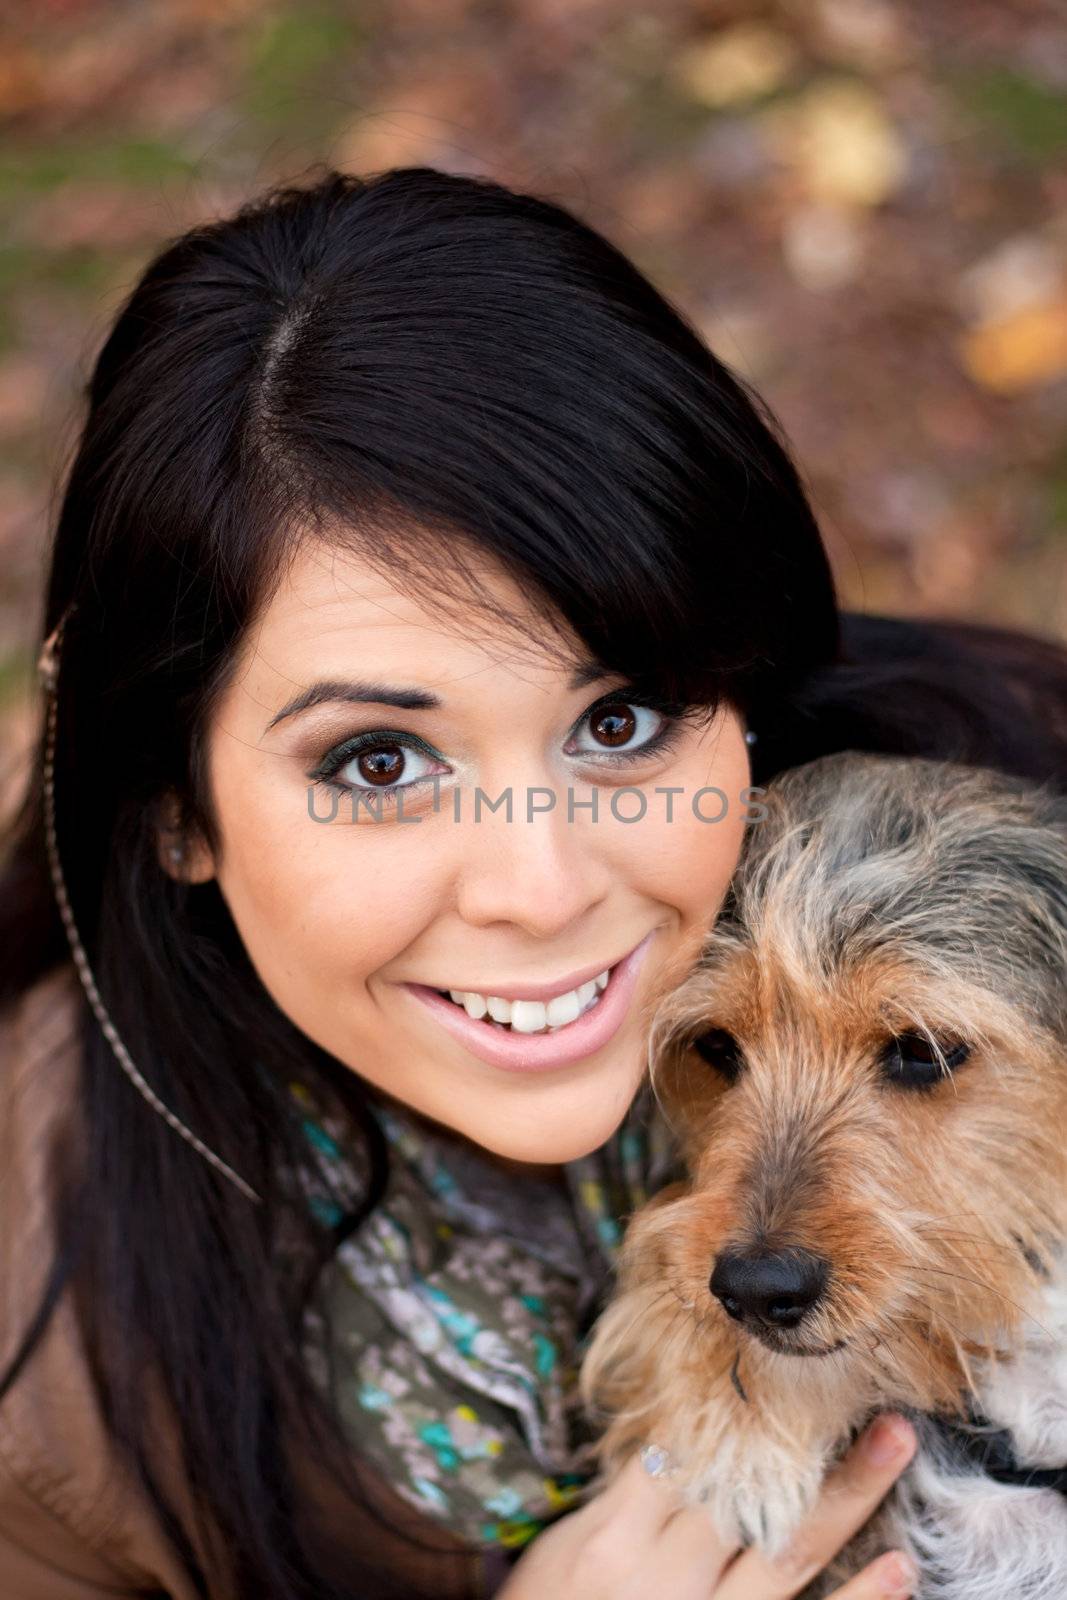 A young woman in her 20s by the sea shore holds a cute mixed breed beagle yorkshire terrier dog also called a Borkie.